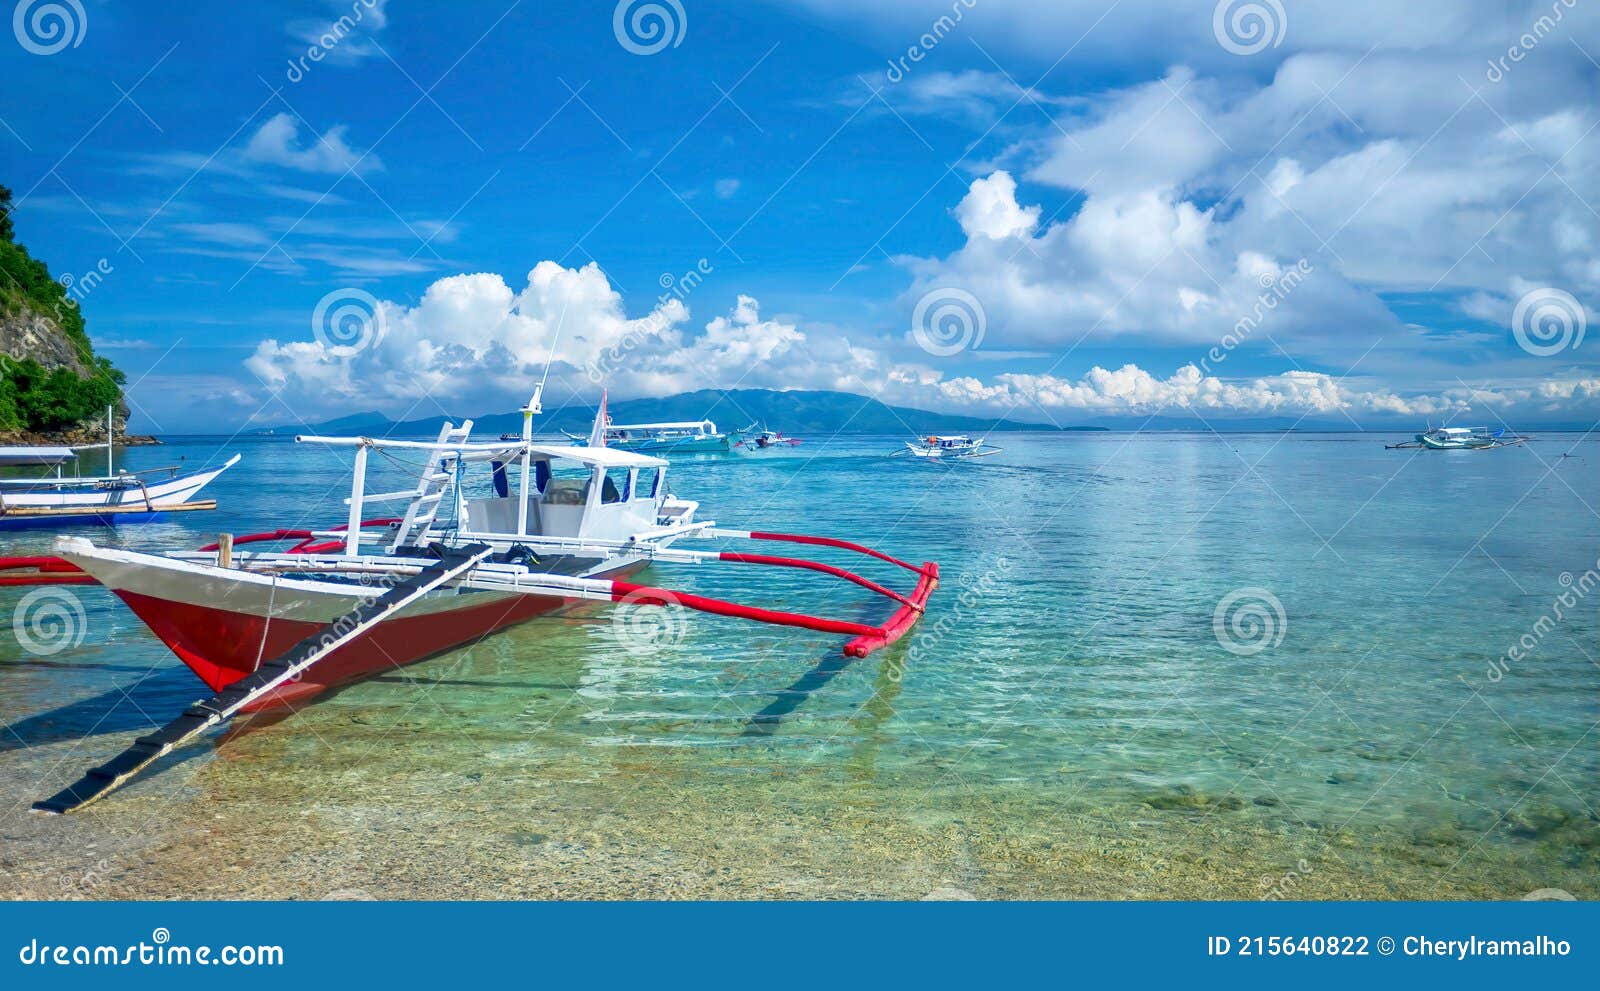 traditional outrigger boats on a tropical island in the philippines.